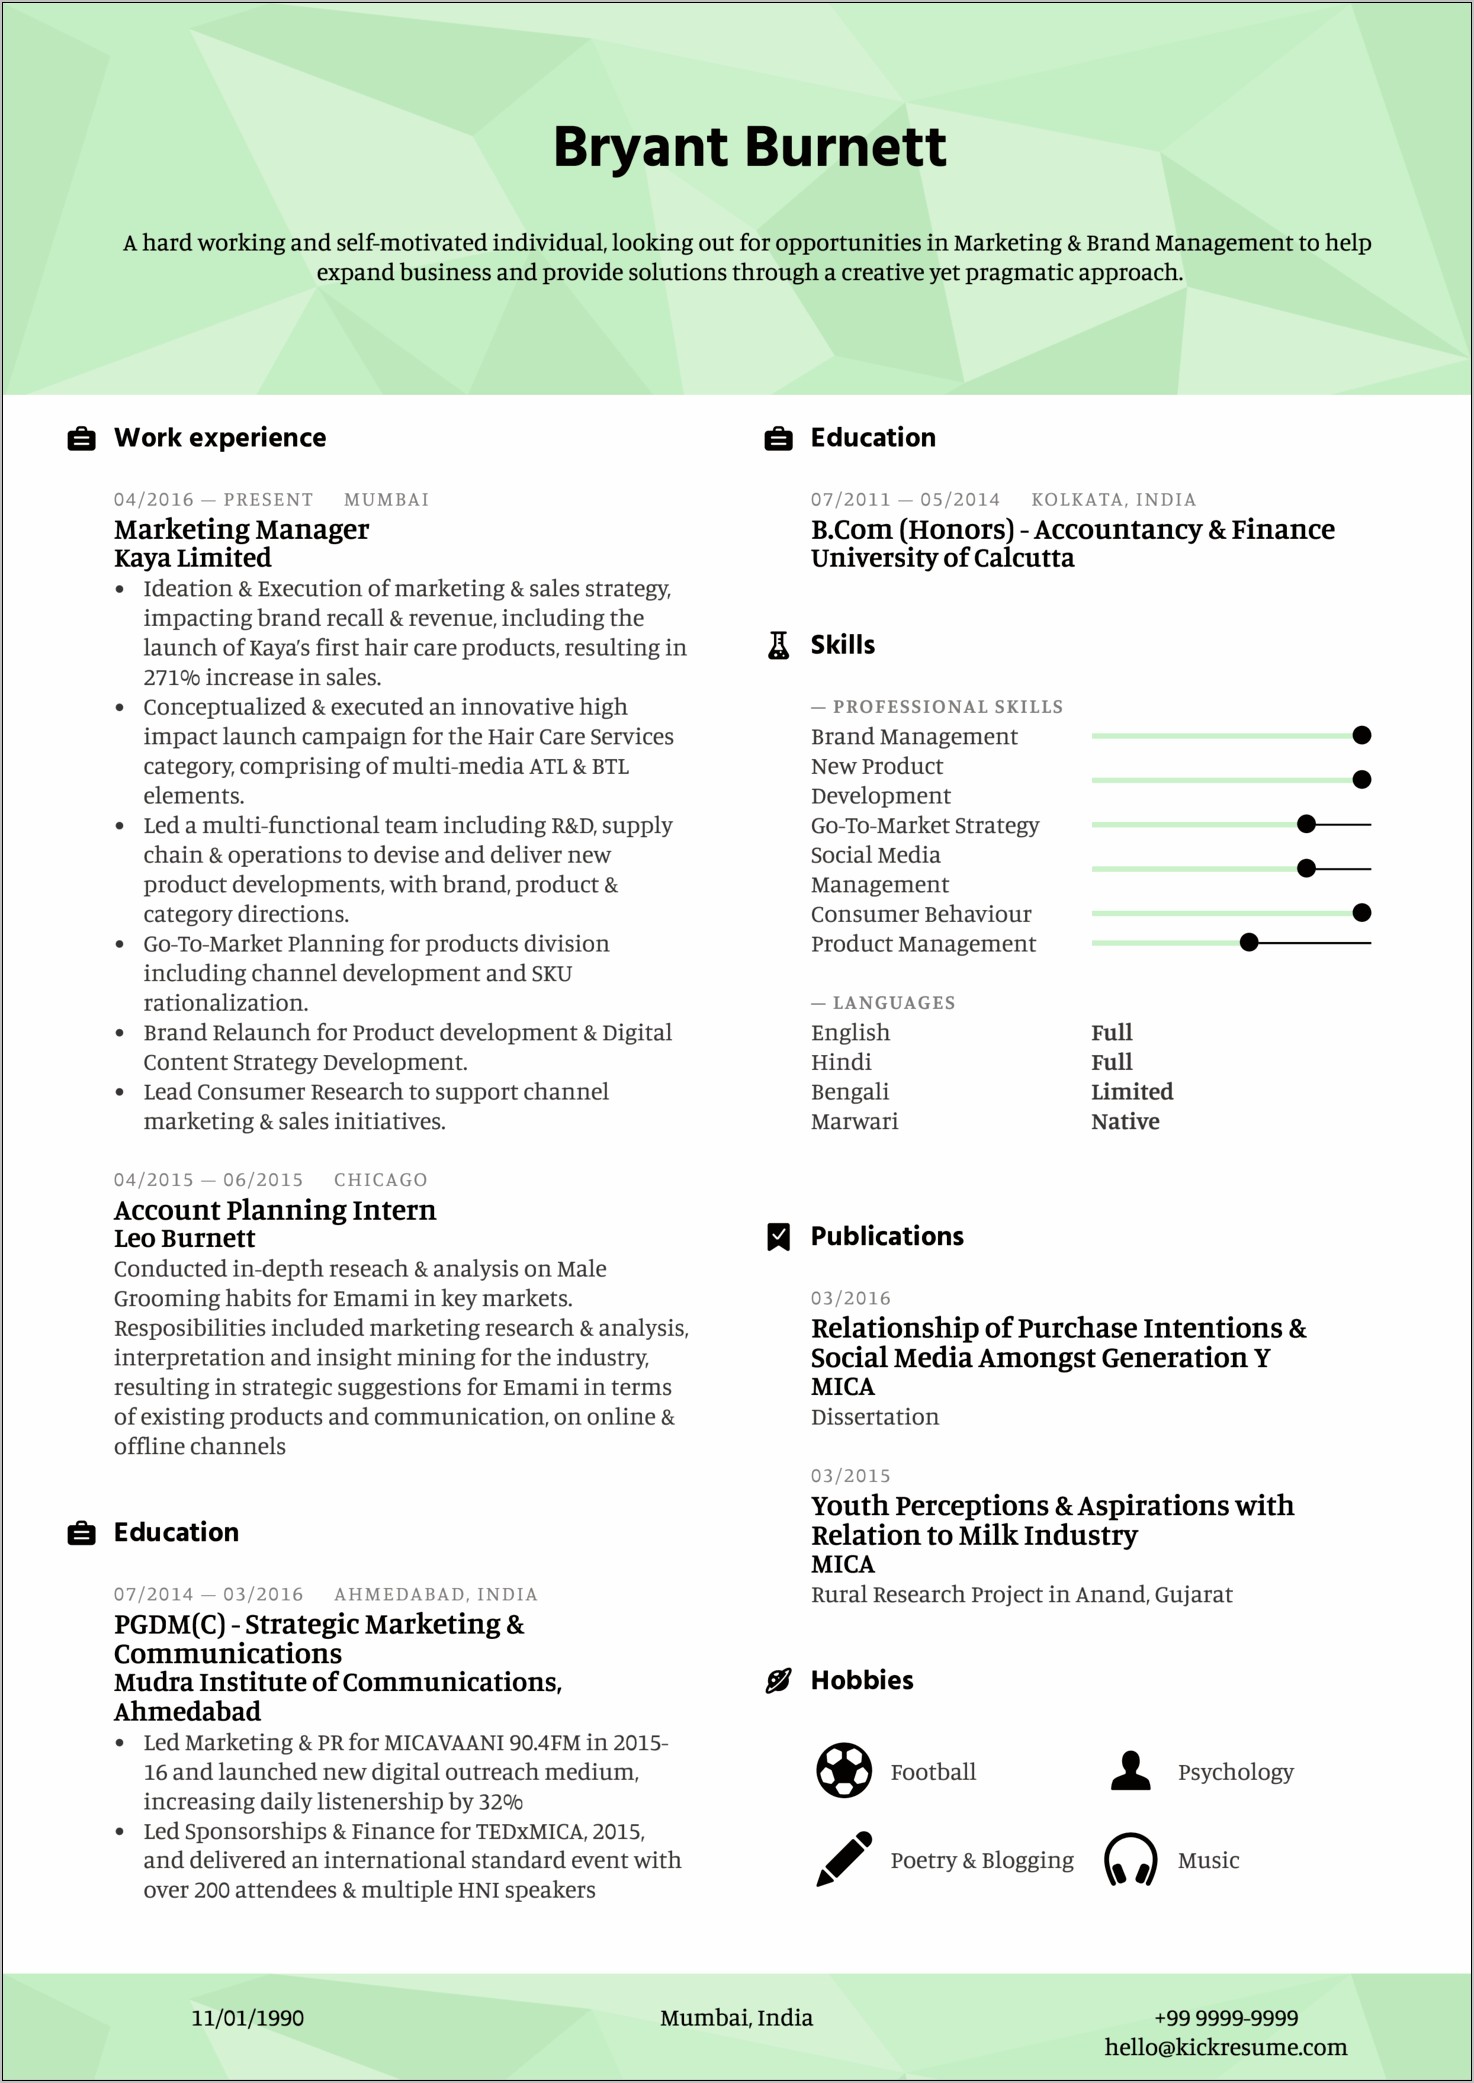 Examples Of Real Estate Manager Resumes